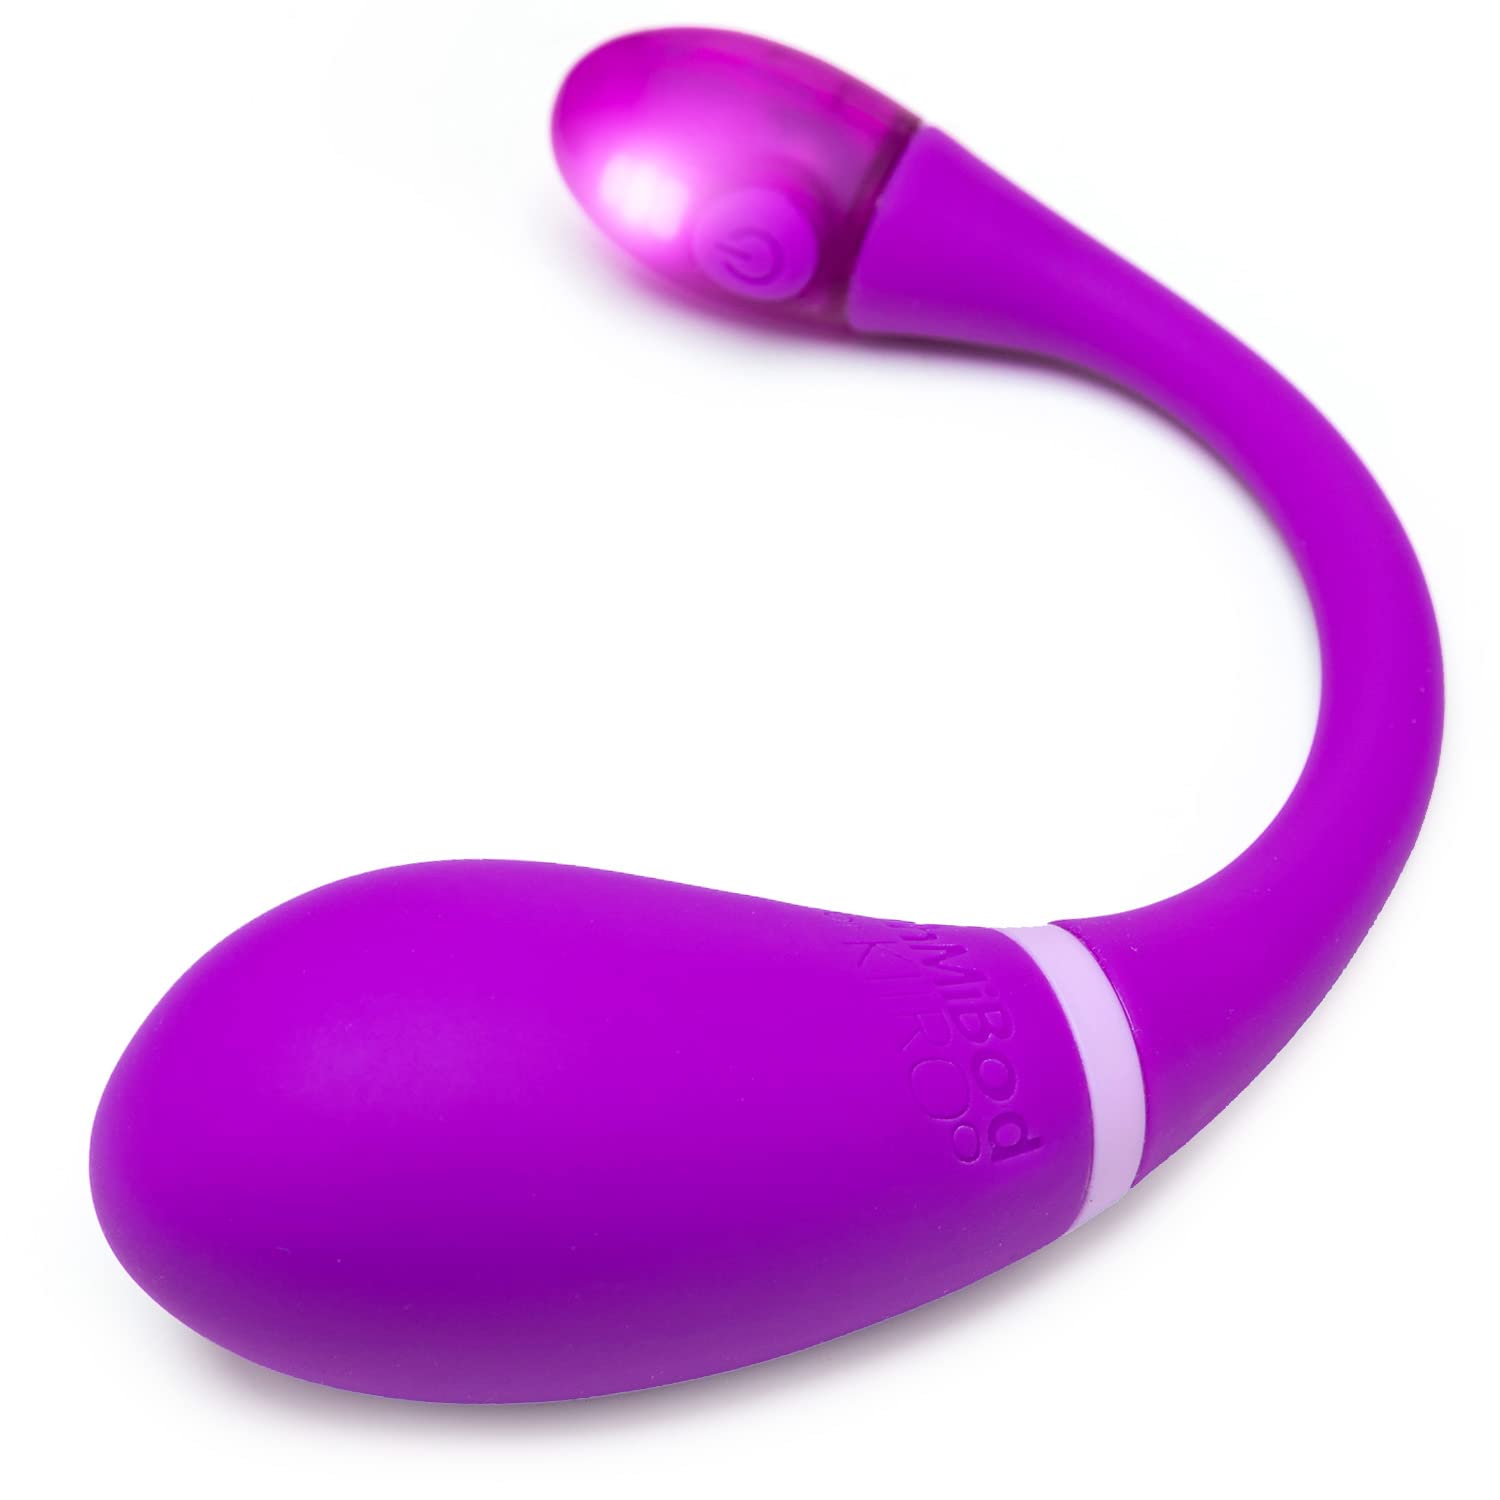 charlene cherry recommends oh my bod vibrator pic